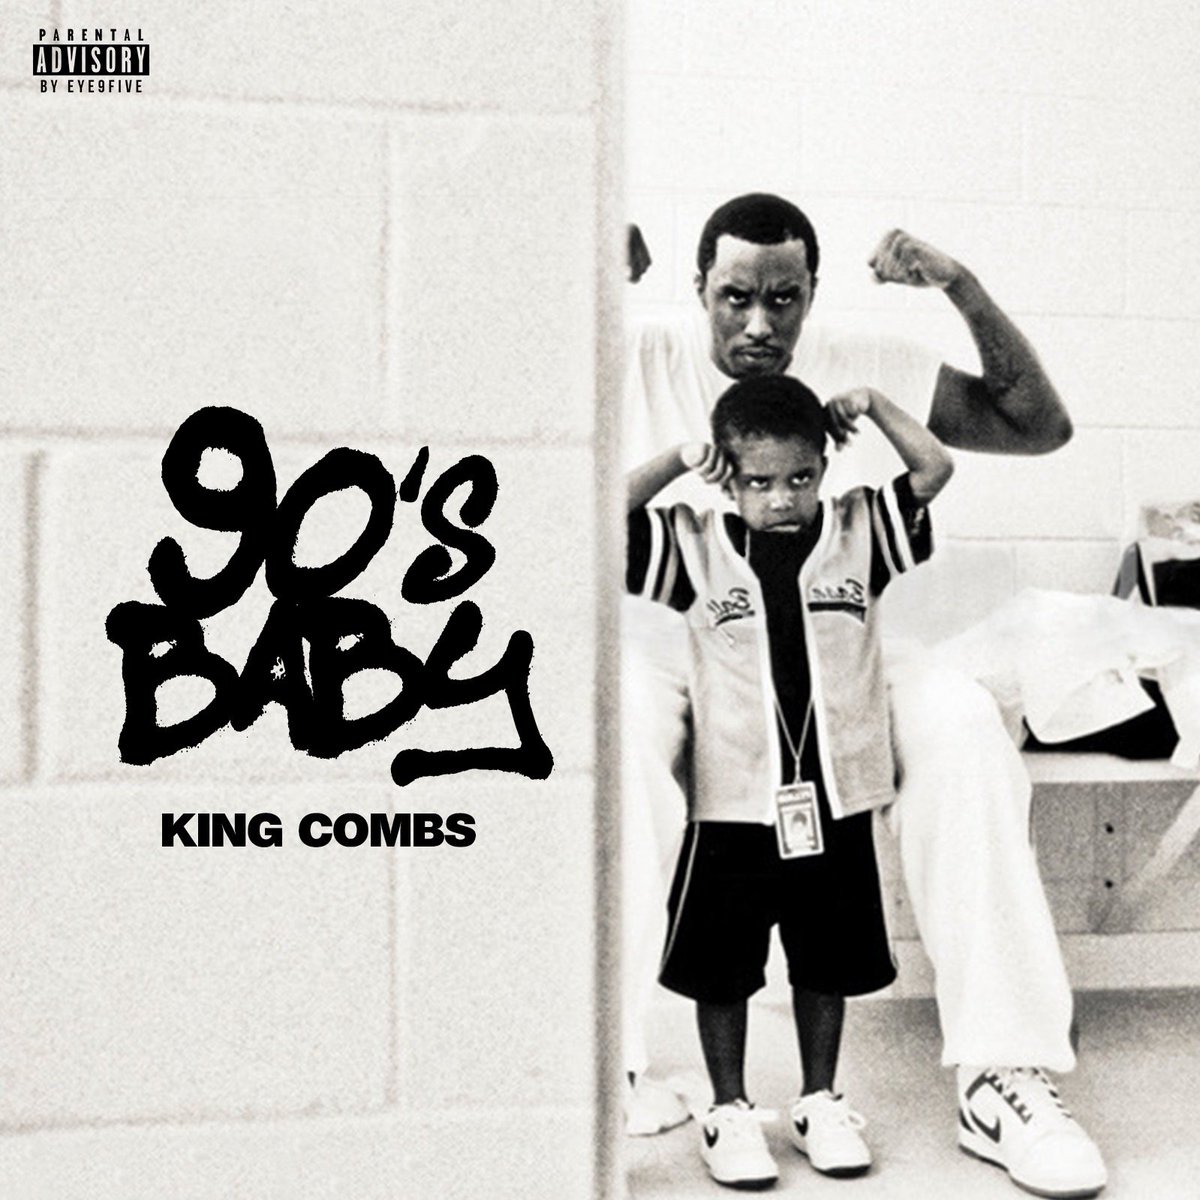 RT @OnSMASH: The debut project from @Kingcombs is out now!

Stream #90sBaby ???? https://t.co/4xnOFSxuZ6 https://t.co/8uqHuwDRPD